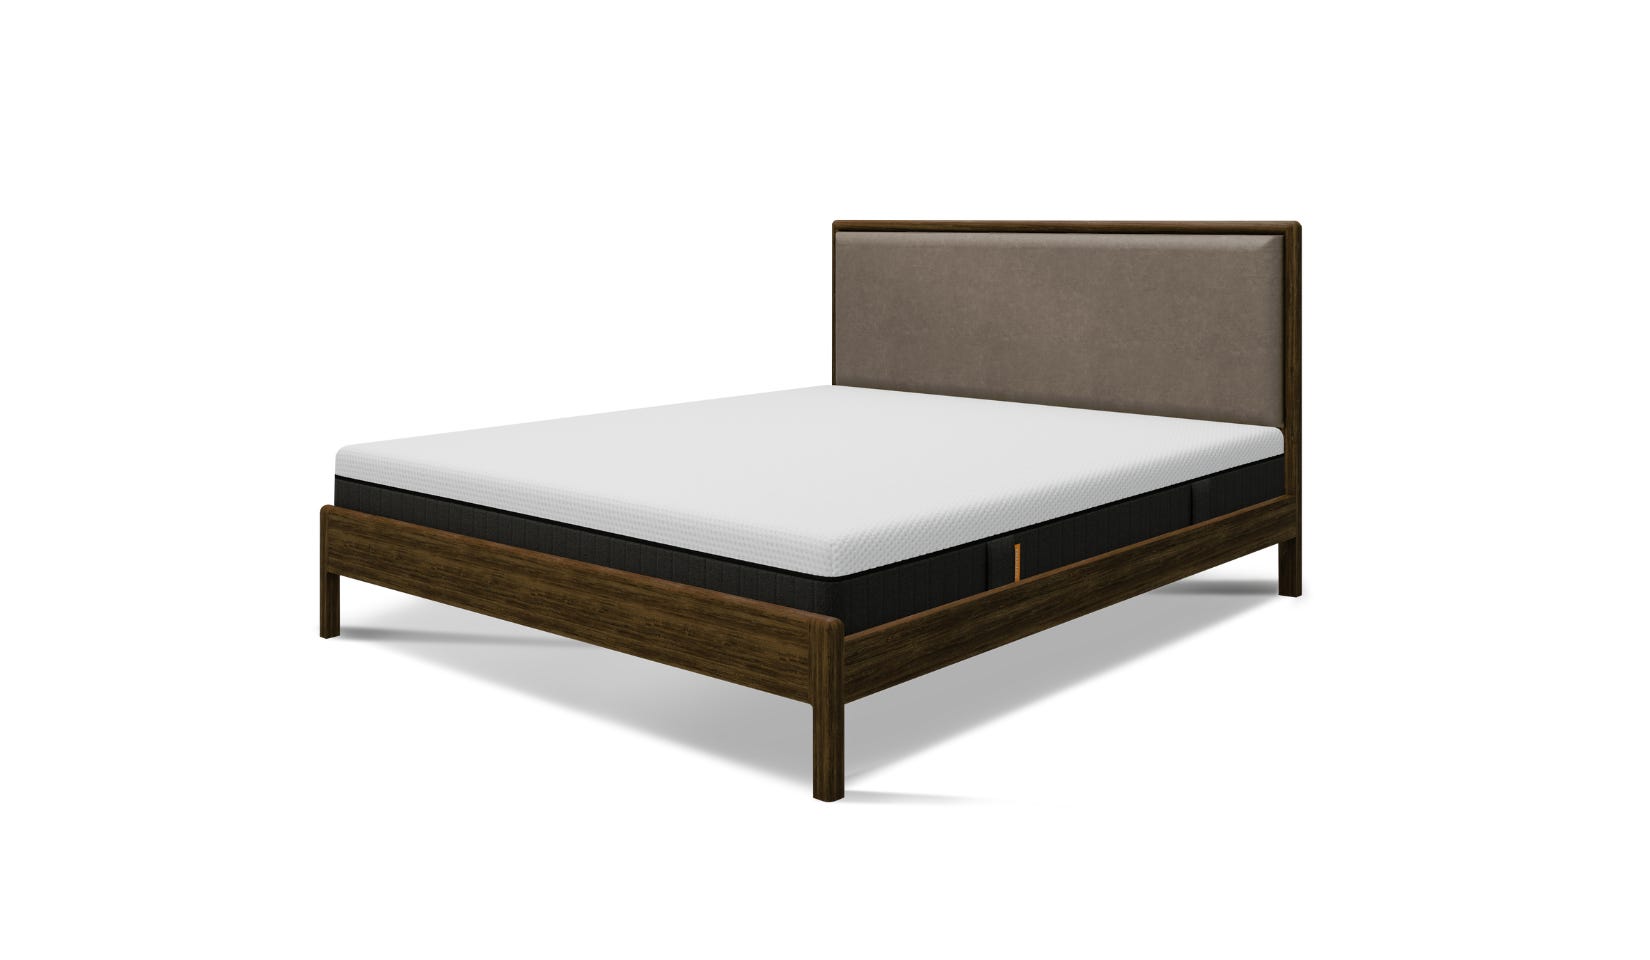 Emma-Rosewood-Bed-Bundle-Product-1200x1000.png